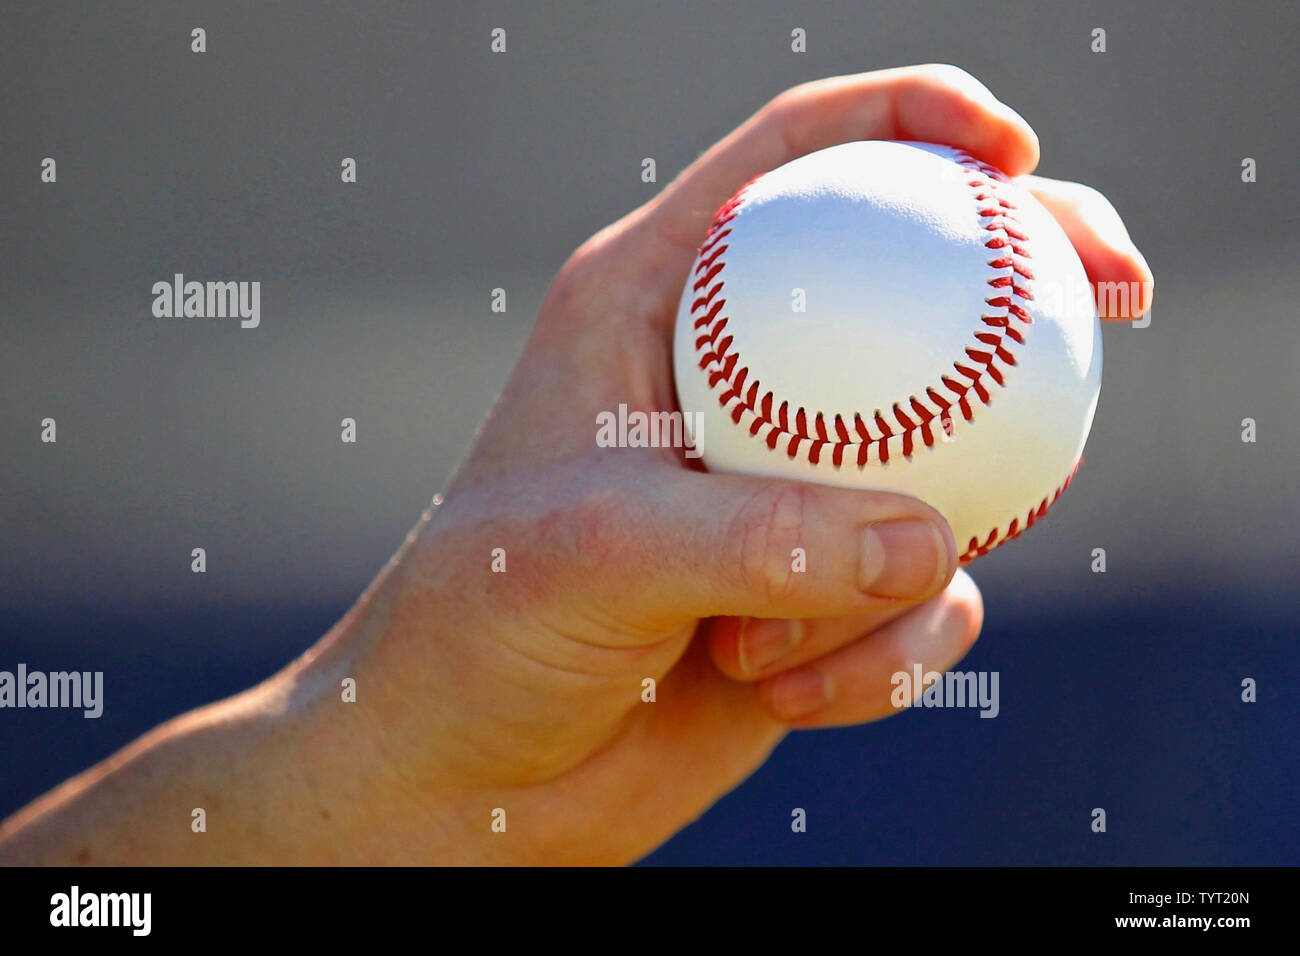 Pitcher gripping a baseball. Stock Photo